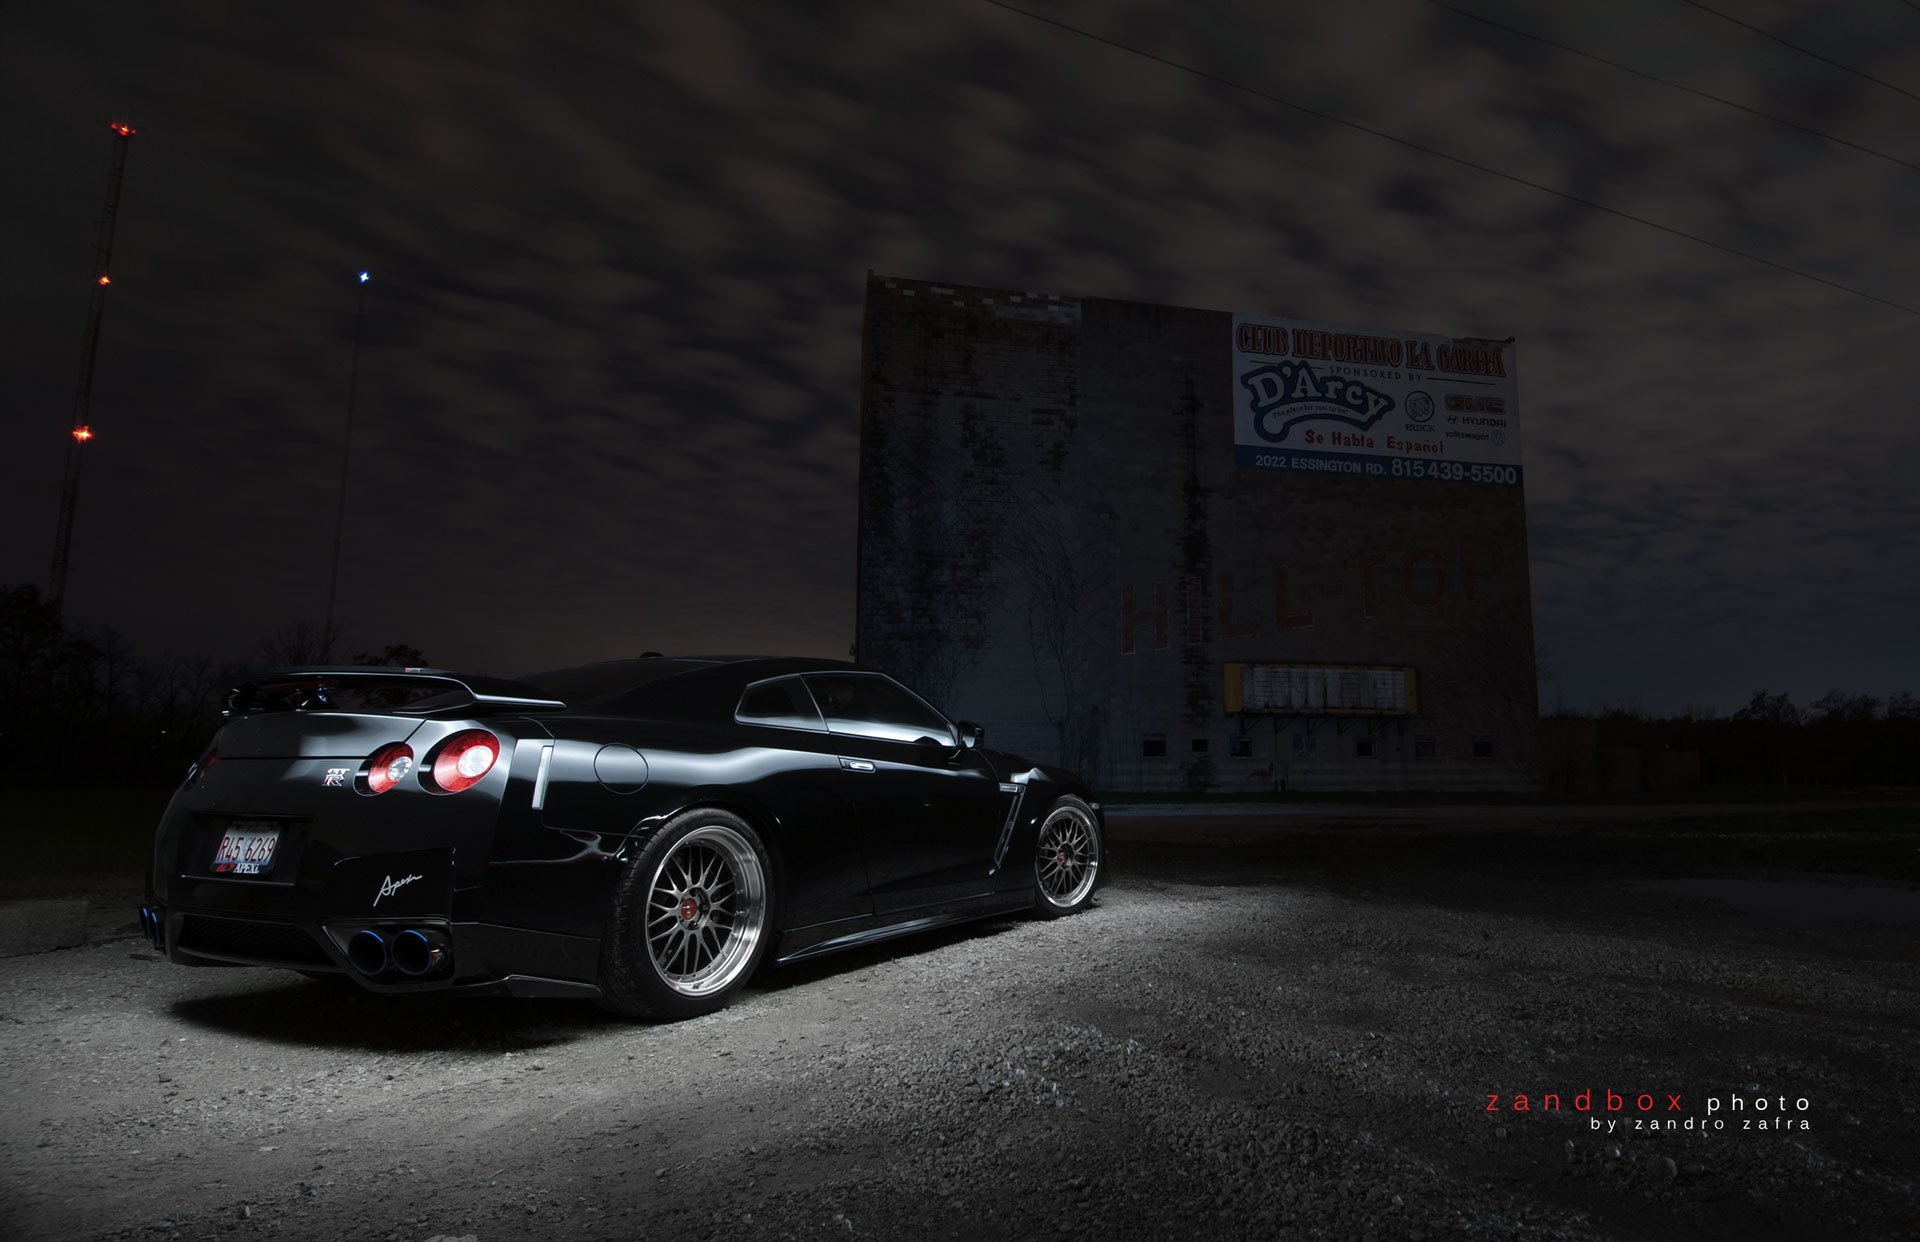 Black Nissan GT-R with Aftermarket Rear Spoiler - Photo by zandbox